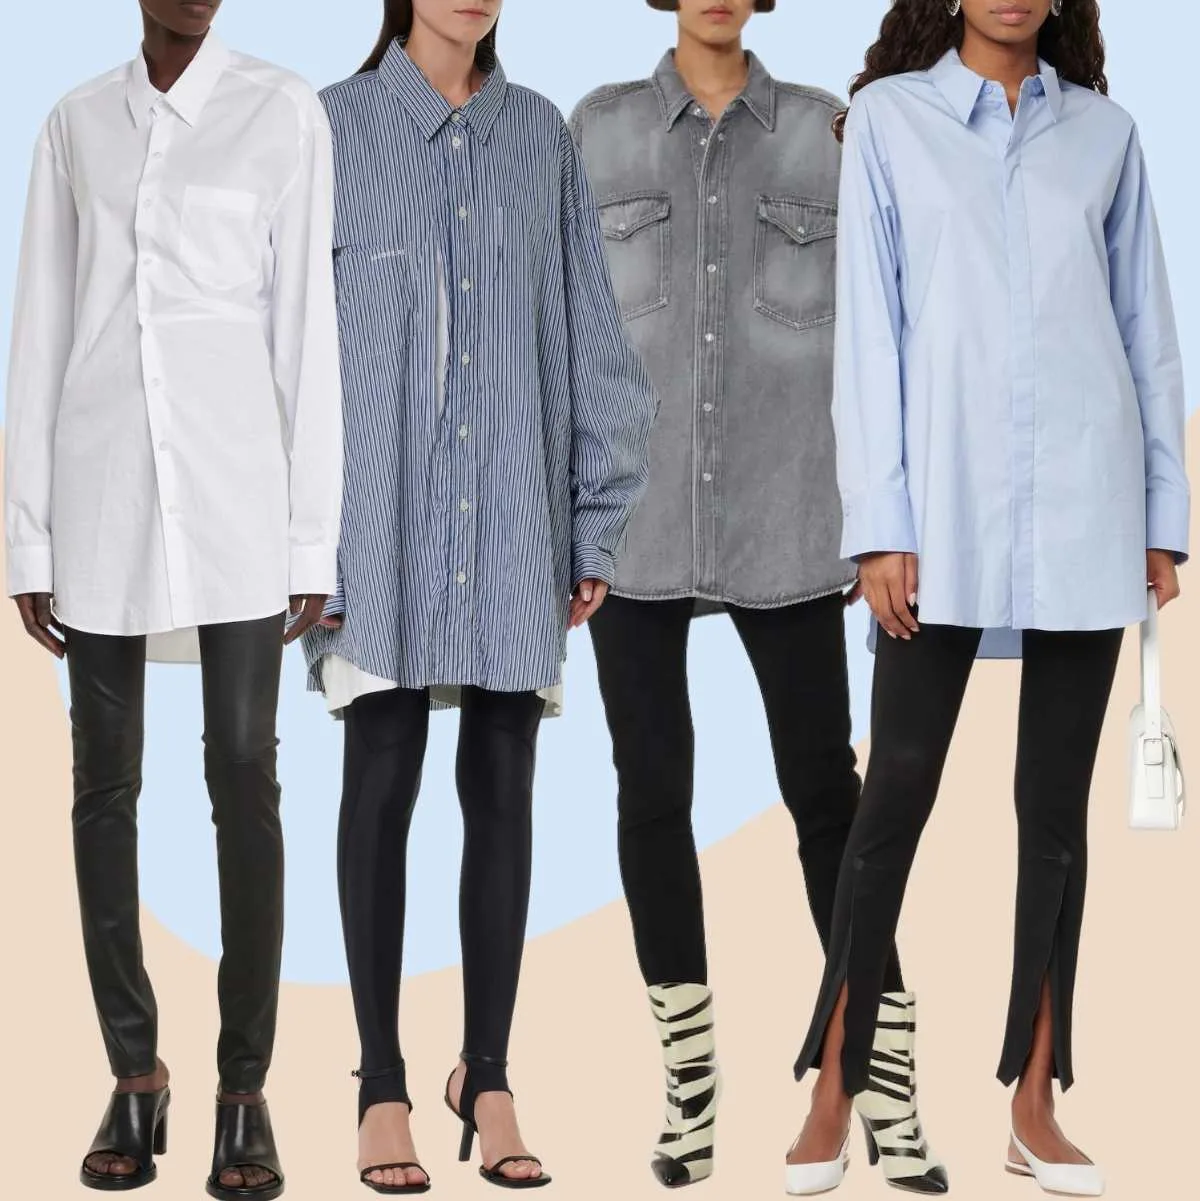 How to Wear Oversized Shirts: 14 Easy Outfit Ideas